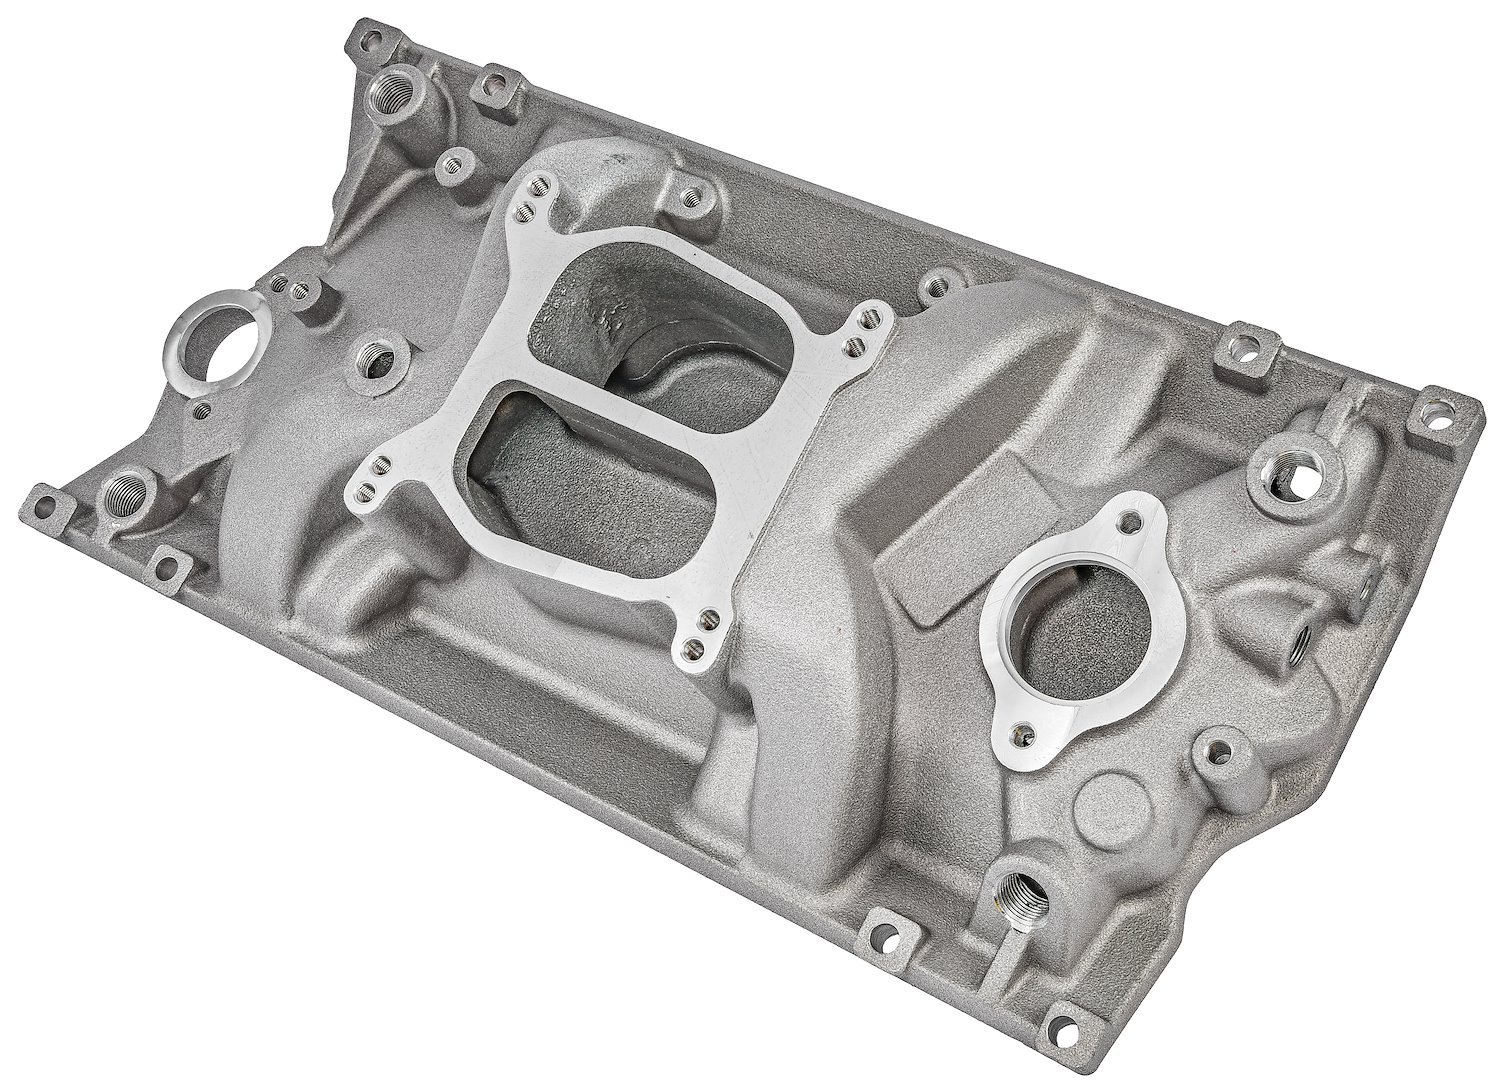 JEGS 513074: Intake Manifold Fits 1996-2002 Small Block Chevy 350 Vortec  Engine JEGS